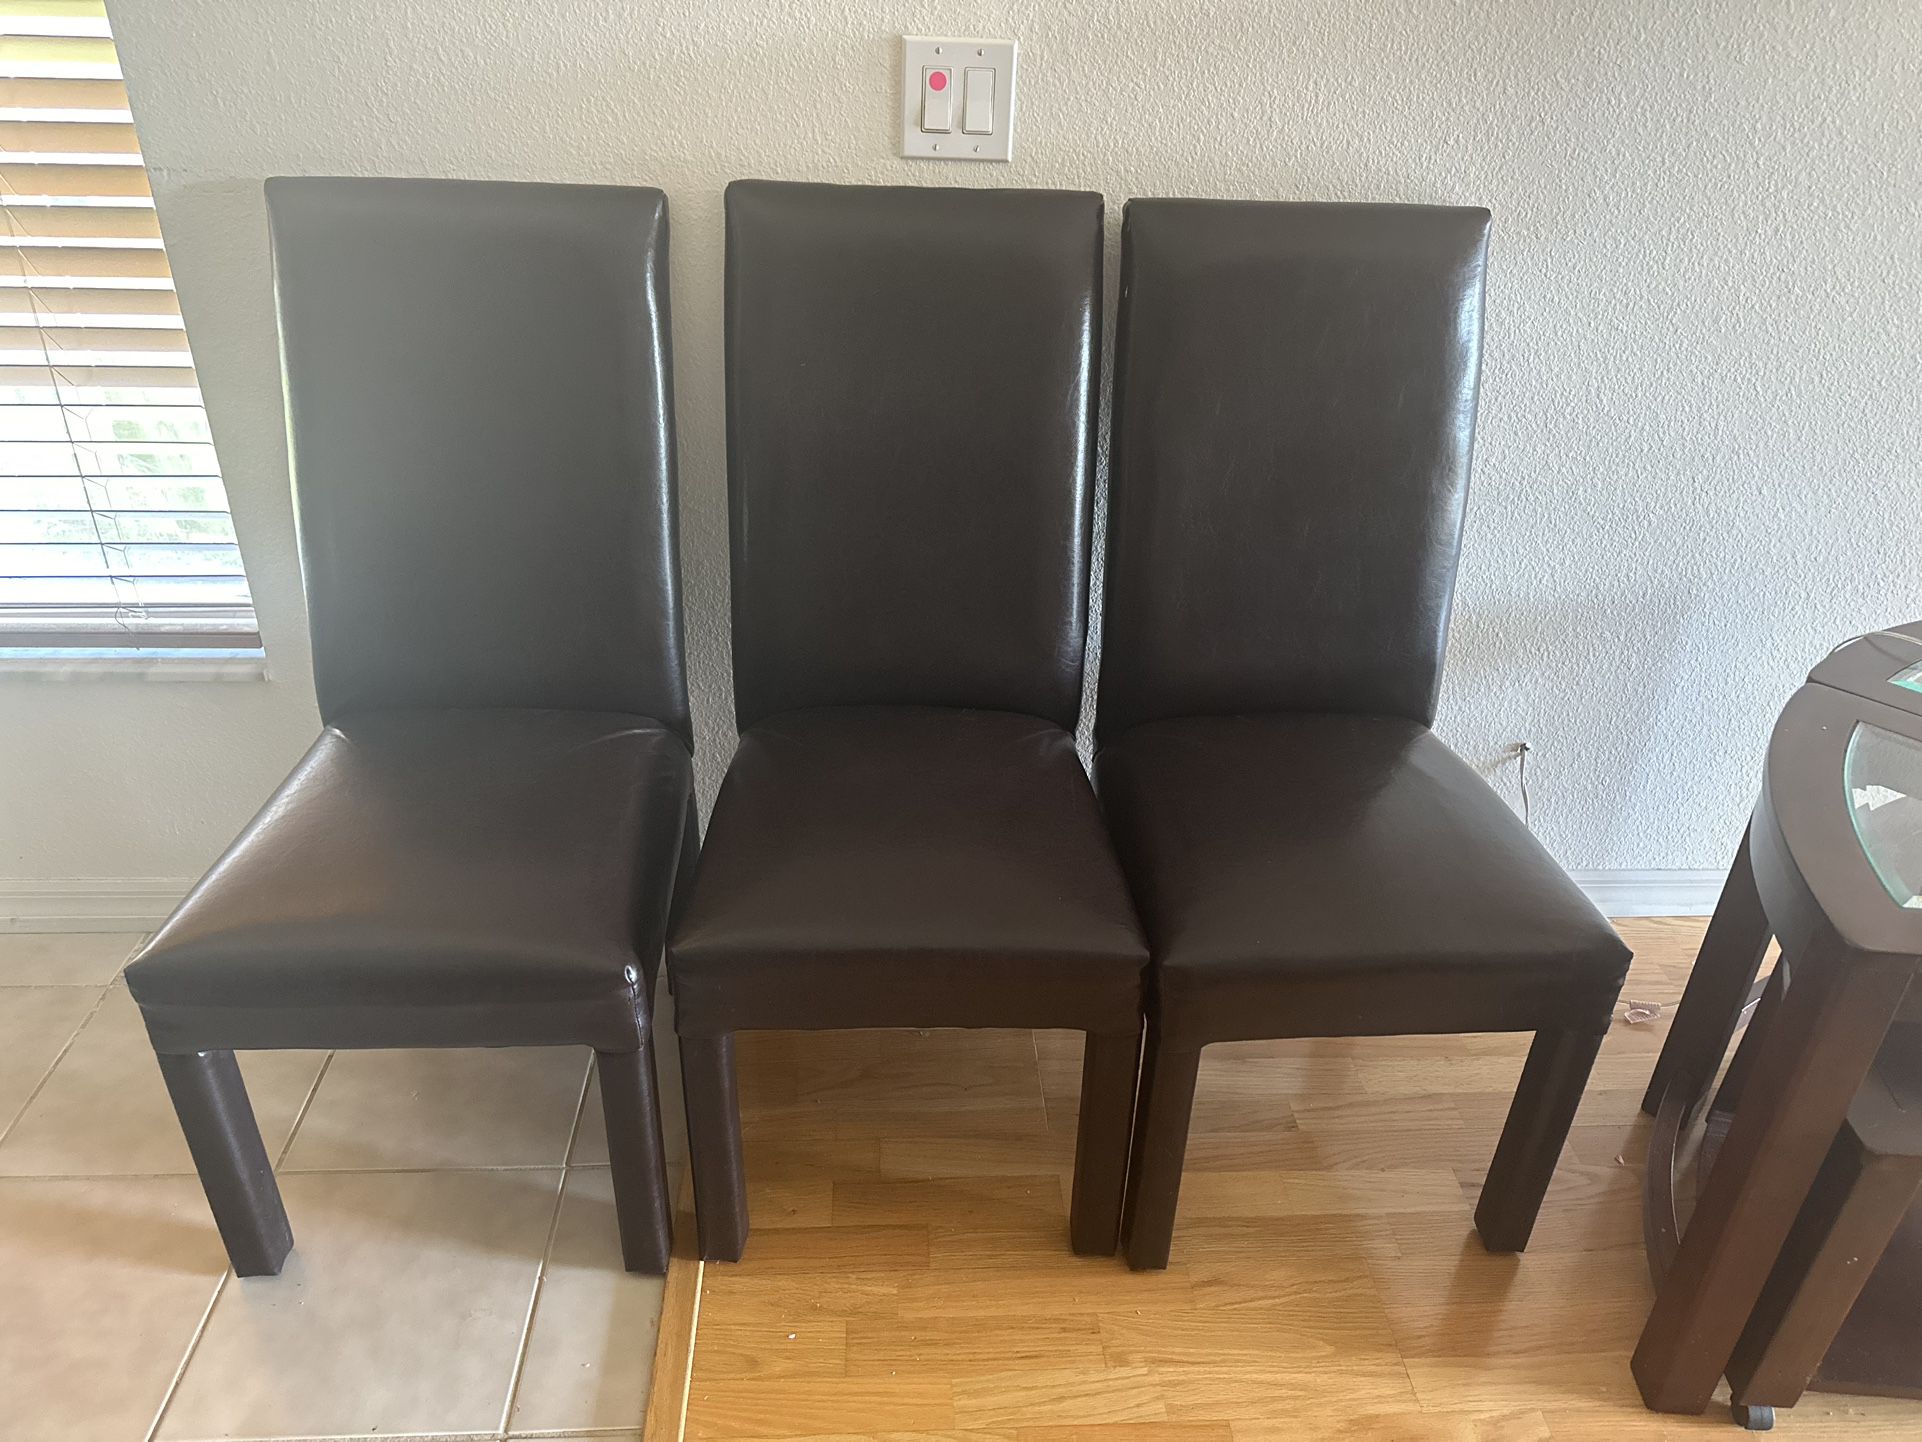 3 Brown Leather Chairs 